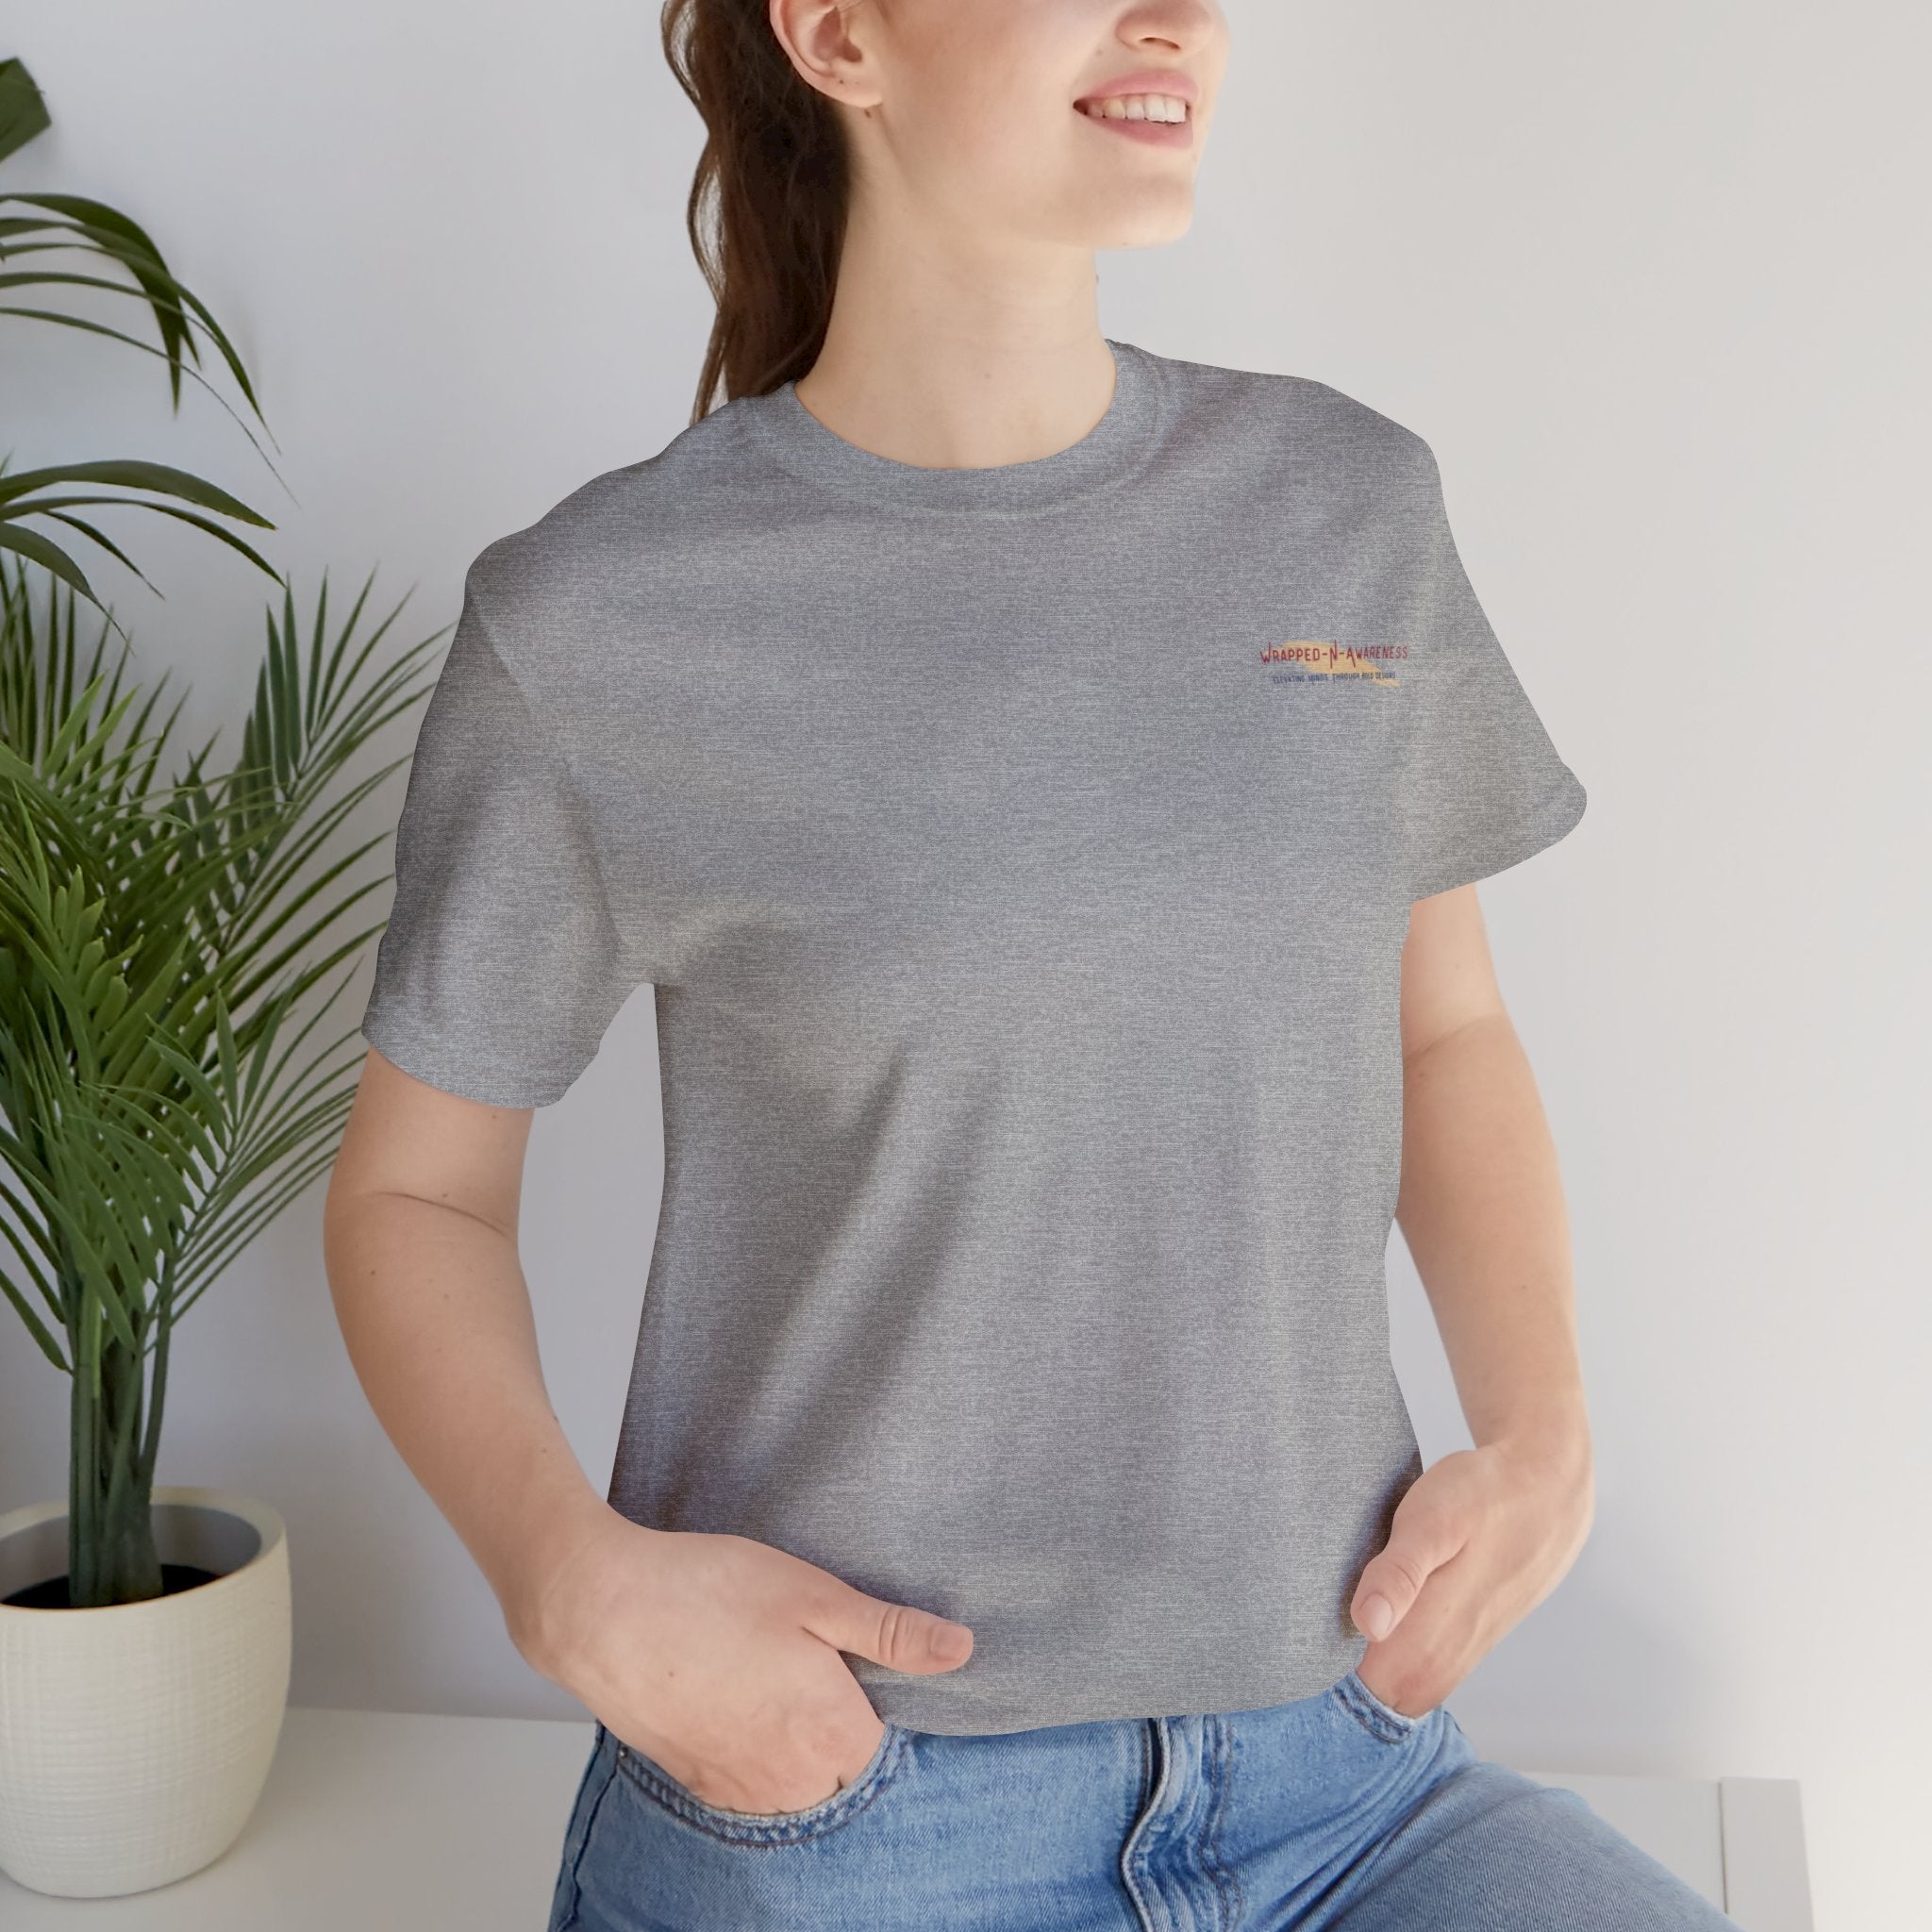 You Are Enough Short Sleeve Tee Bella+Canvas 3001 Heather Mauve Airlume Cotton Bella+Canvas 3001 Crew Neckline Jersey Short Sleeve Lightweight Fabric Mental Health Support Retail Fit Tear-away Label Tee Unisex Tee T-Shirt 8216019507578510022_2048 Printify